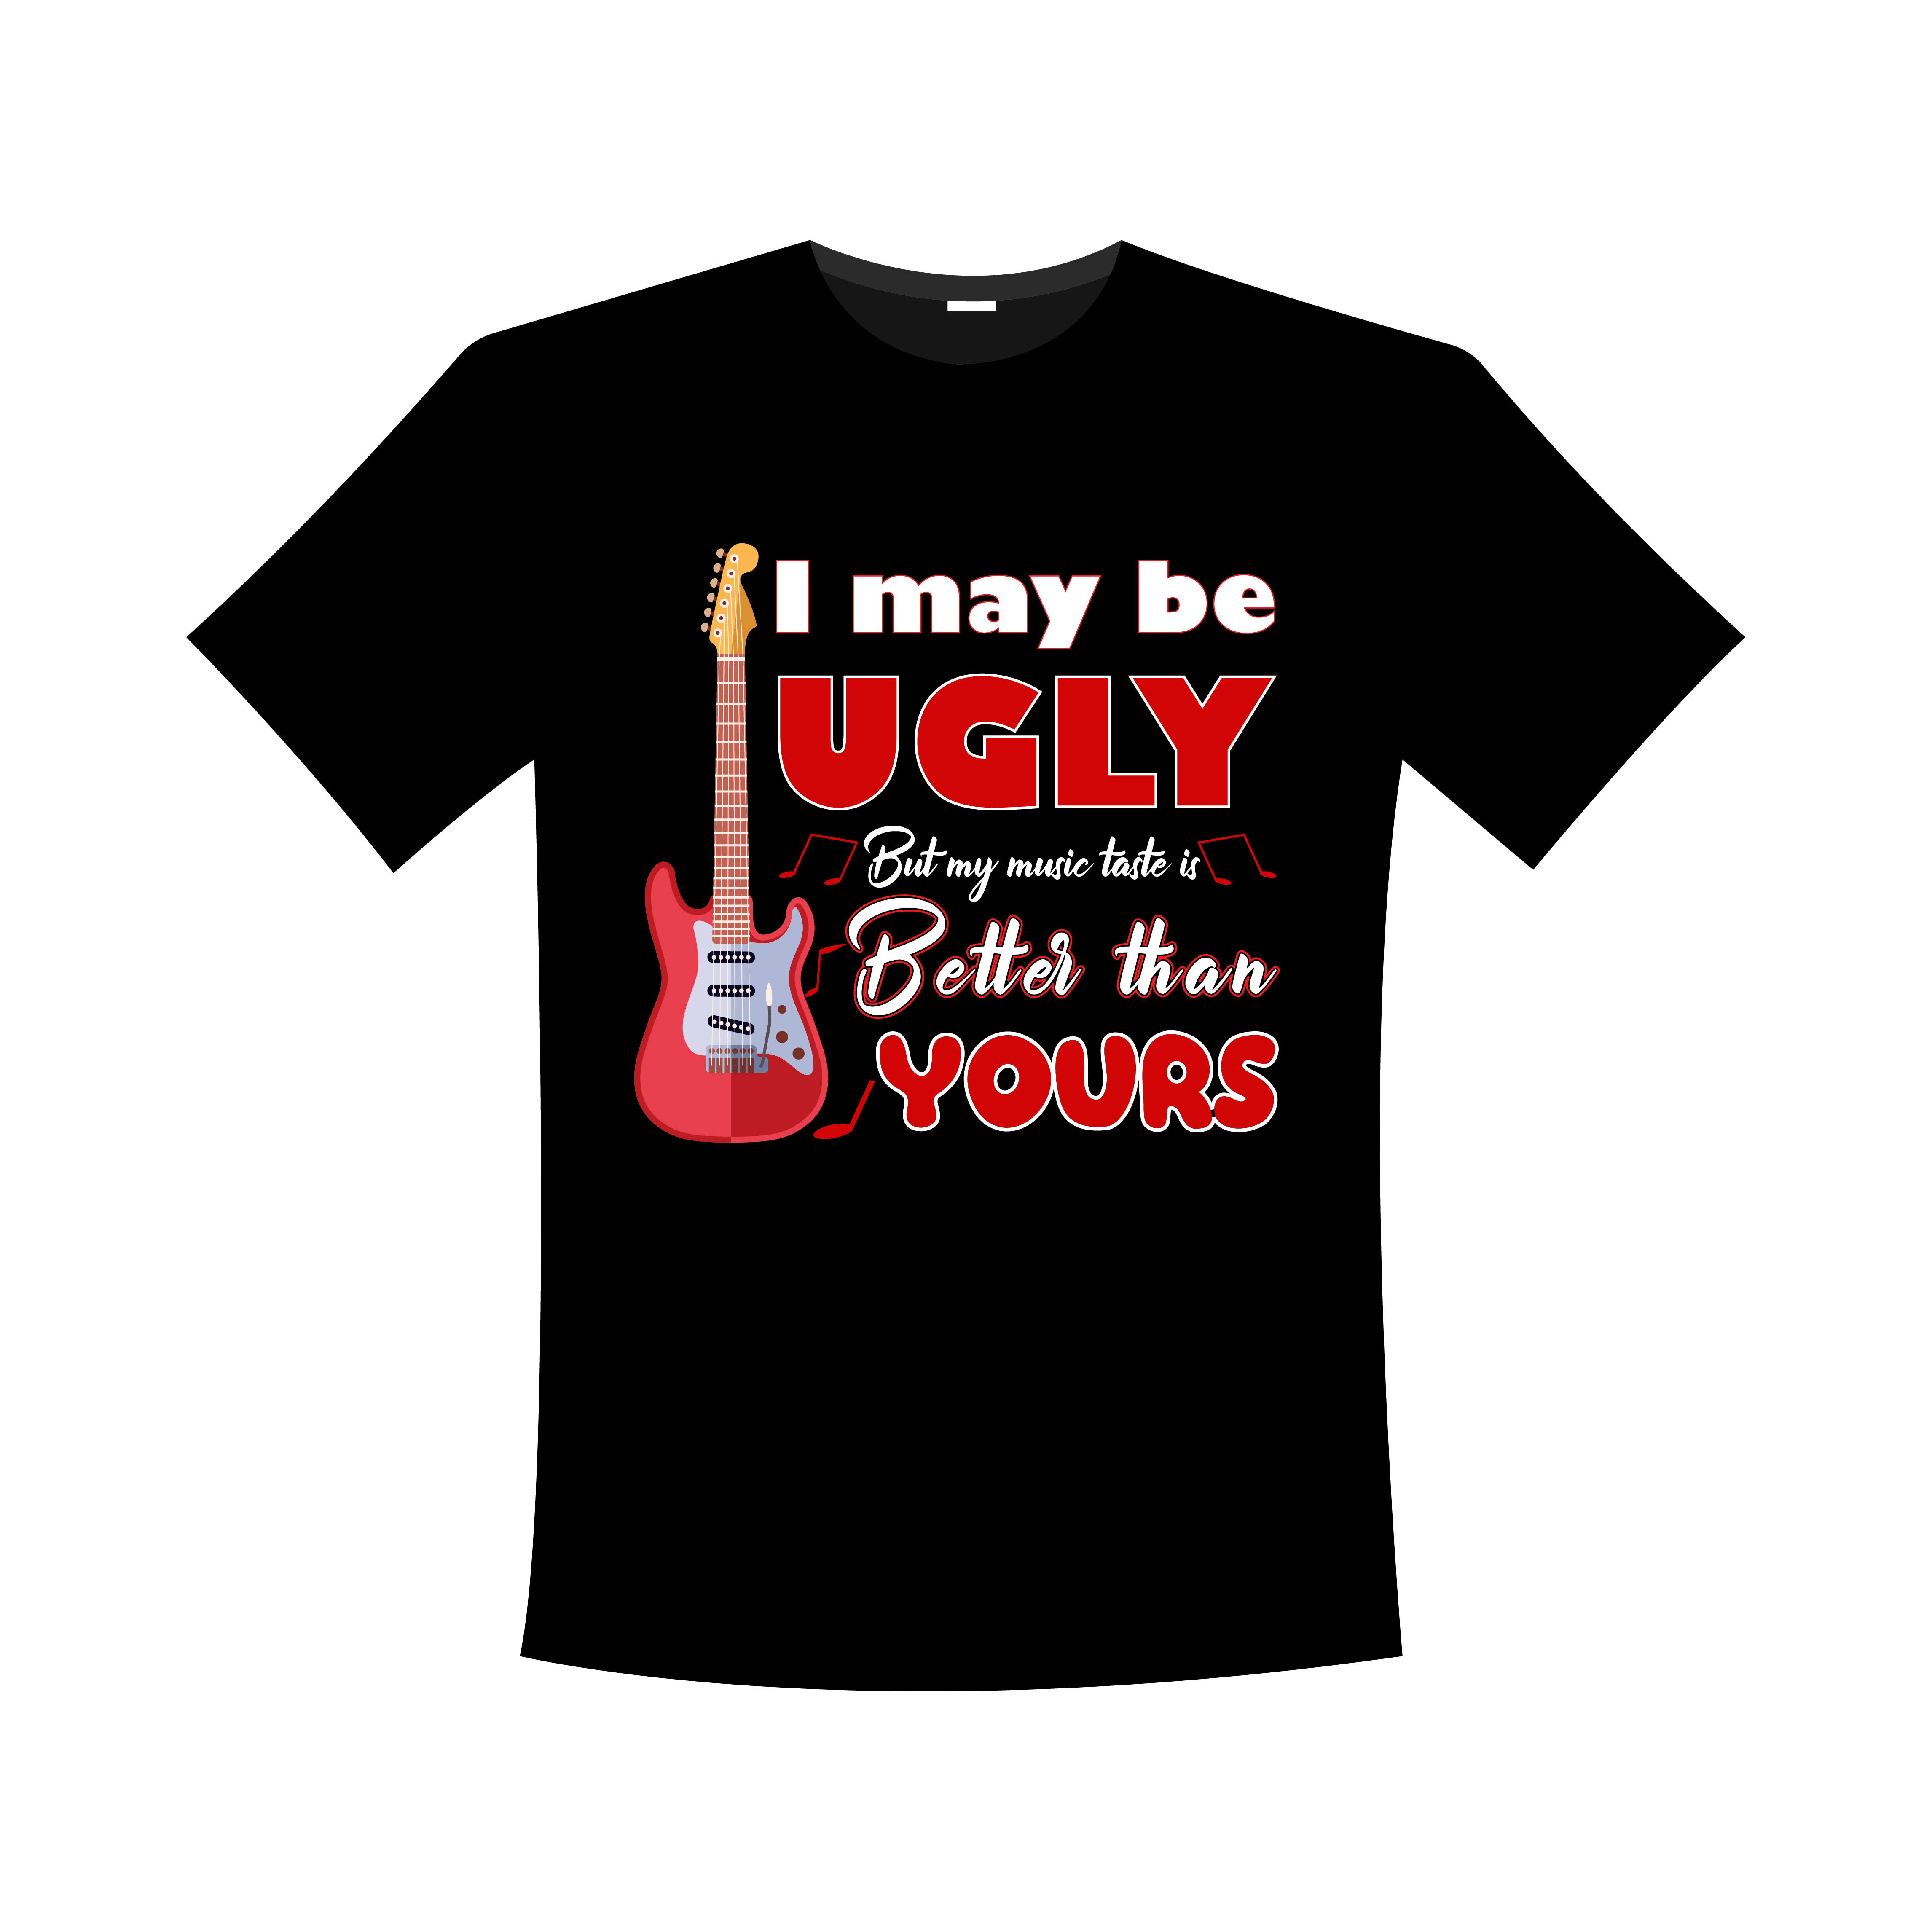 Typography T-Shirt for Music cover image.